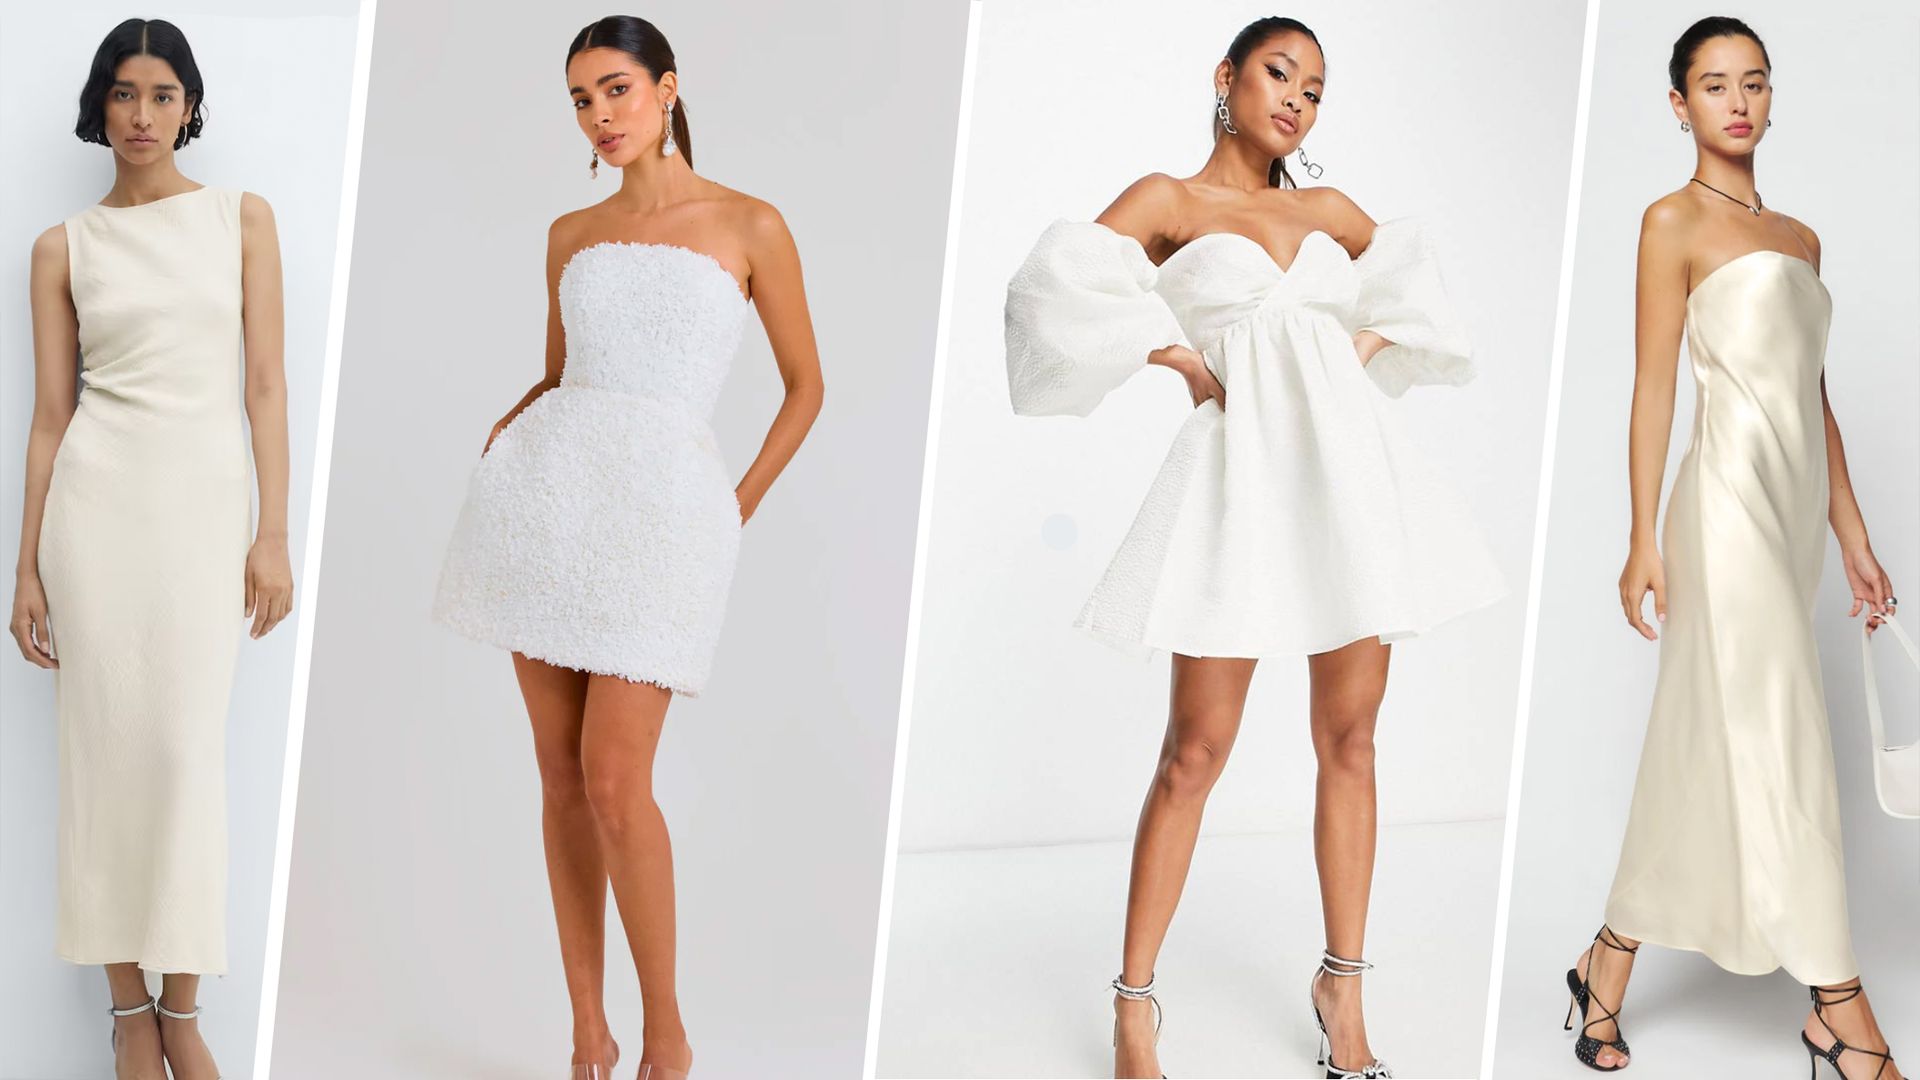 12 white hen party dresses for the bride to wow in